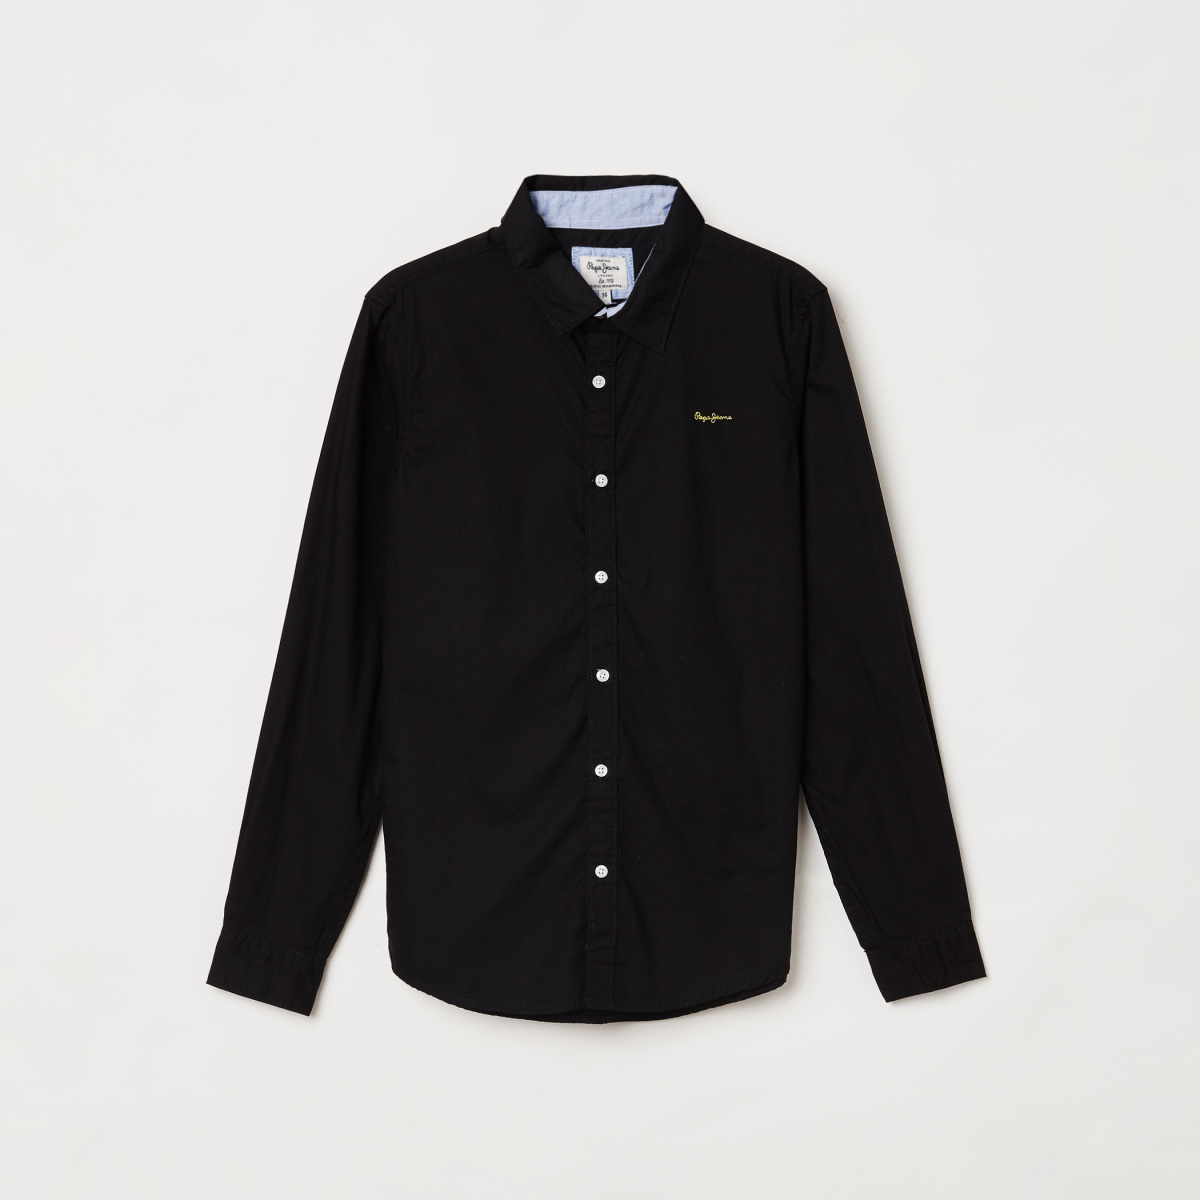 PEPE JEANS Boys Solid Spread Collar Shirt